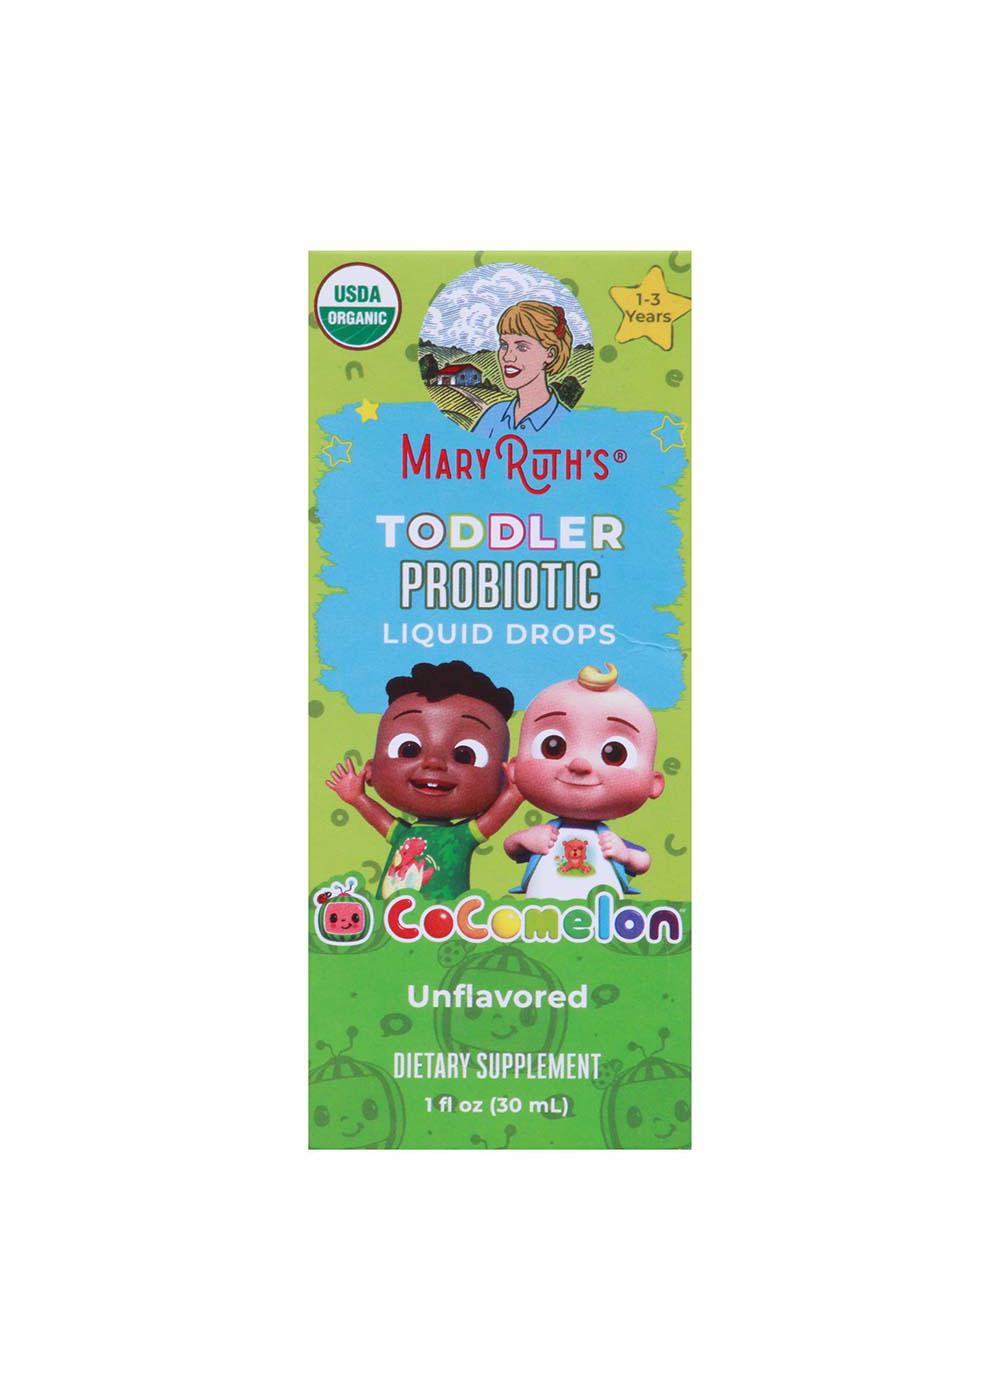 Mary Ruth's Toddler Probiotic Liquid Drops - Unflavored; image 1 of 2